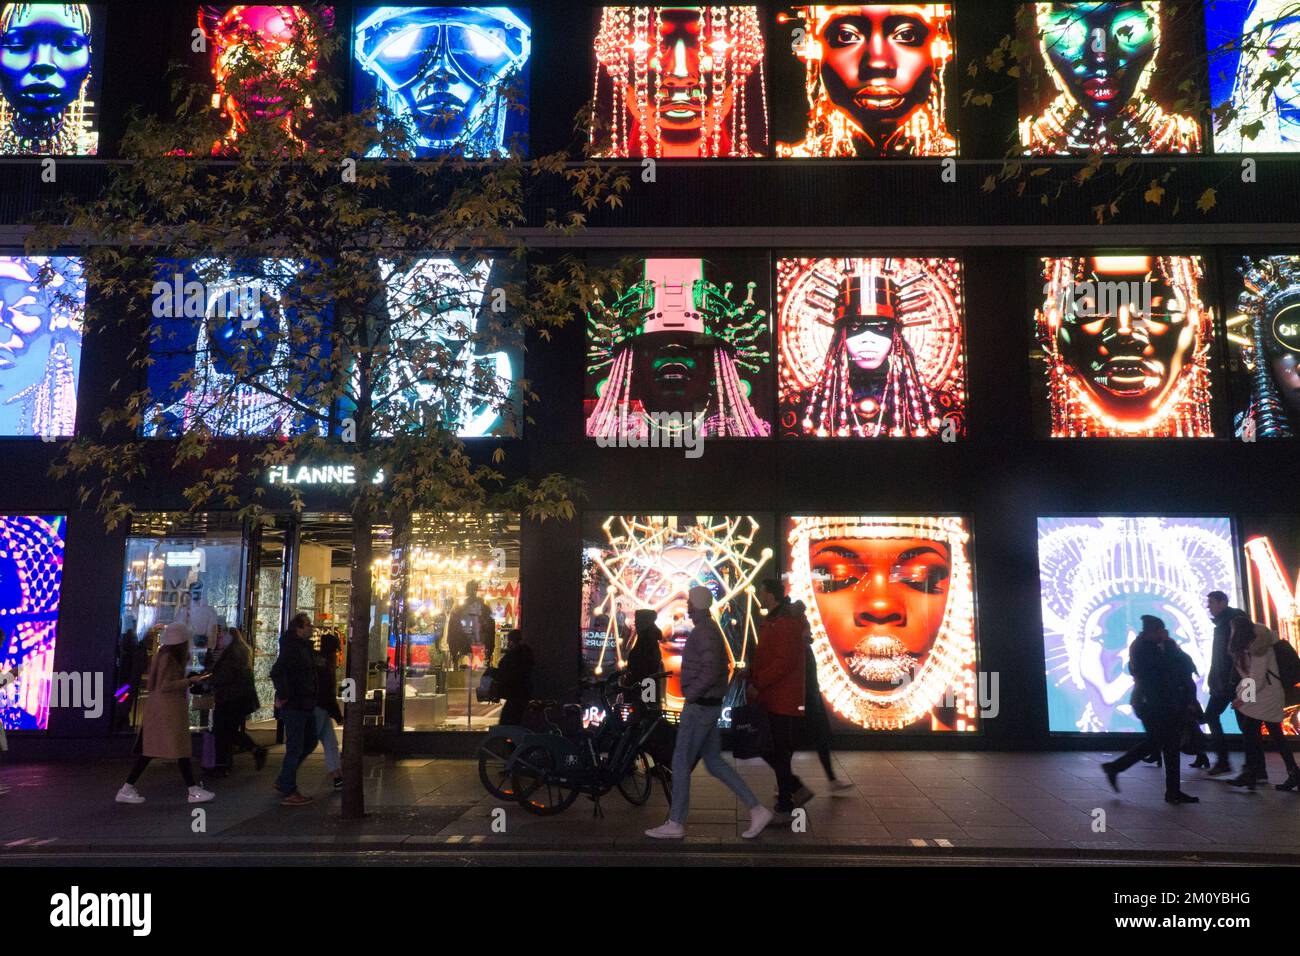 London, UK, 8 December 2022: Christmas lights add sparkle to the sunset sky at dusk on Oxford Street in the West End. Shoppers crowd the streets despite concerns about consumer confidence during the cost of living crisis. Anna Watson/Alamy Live News Stock Photo